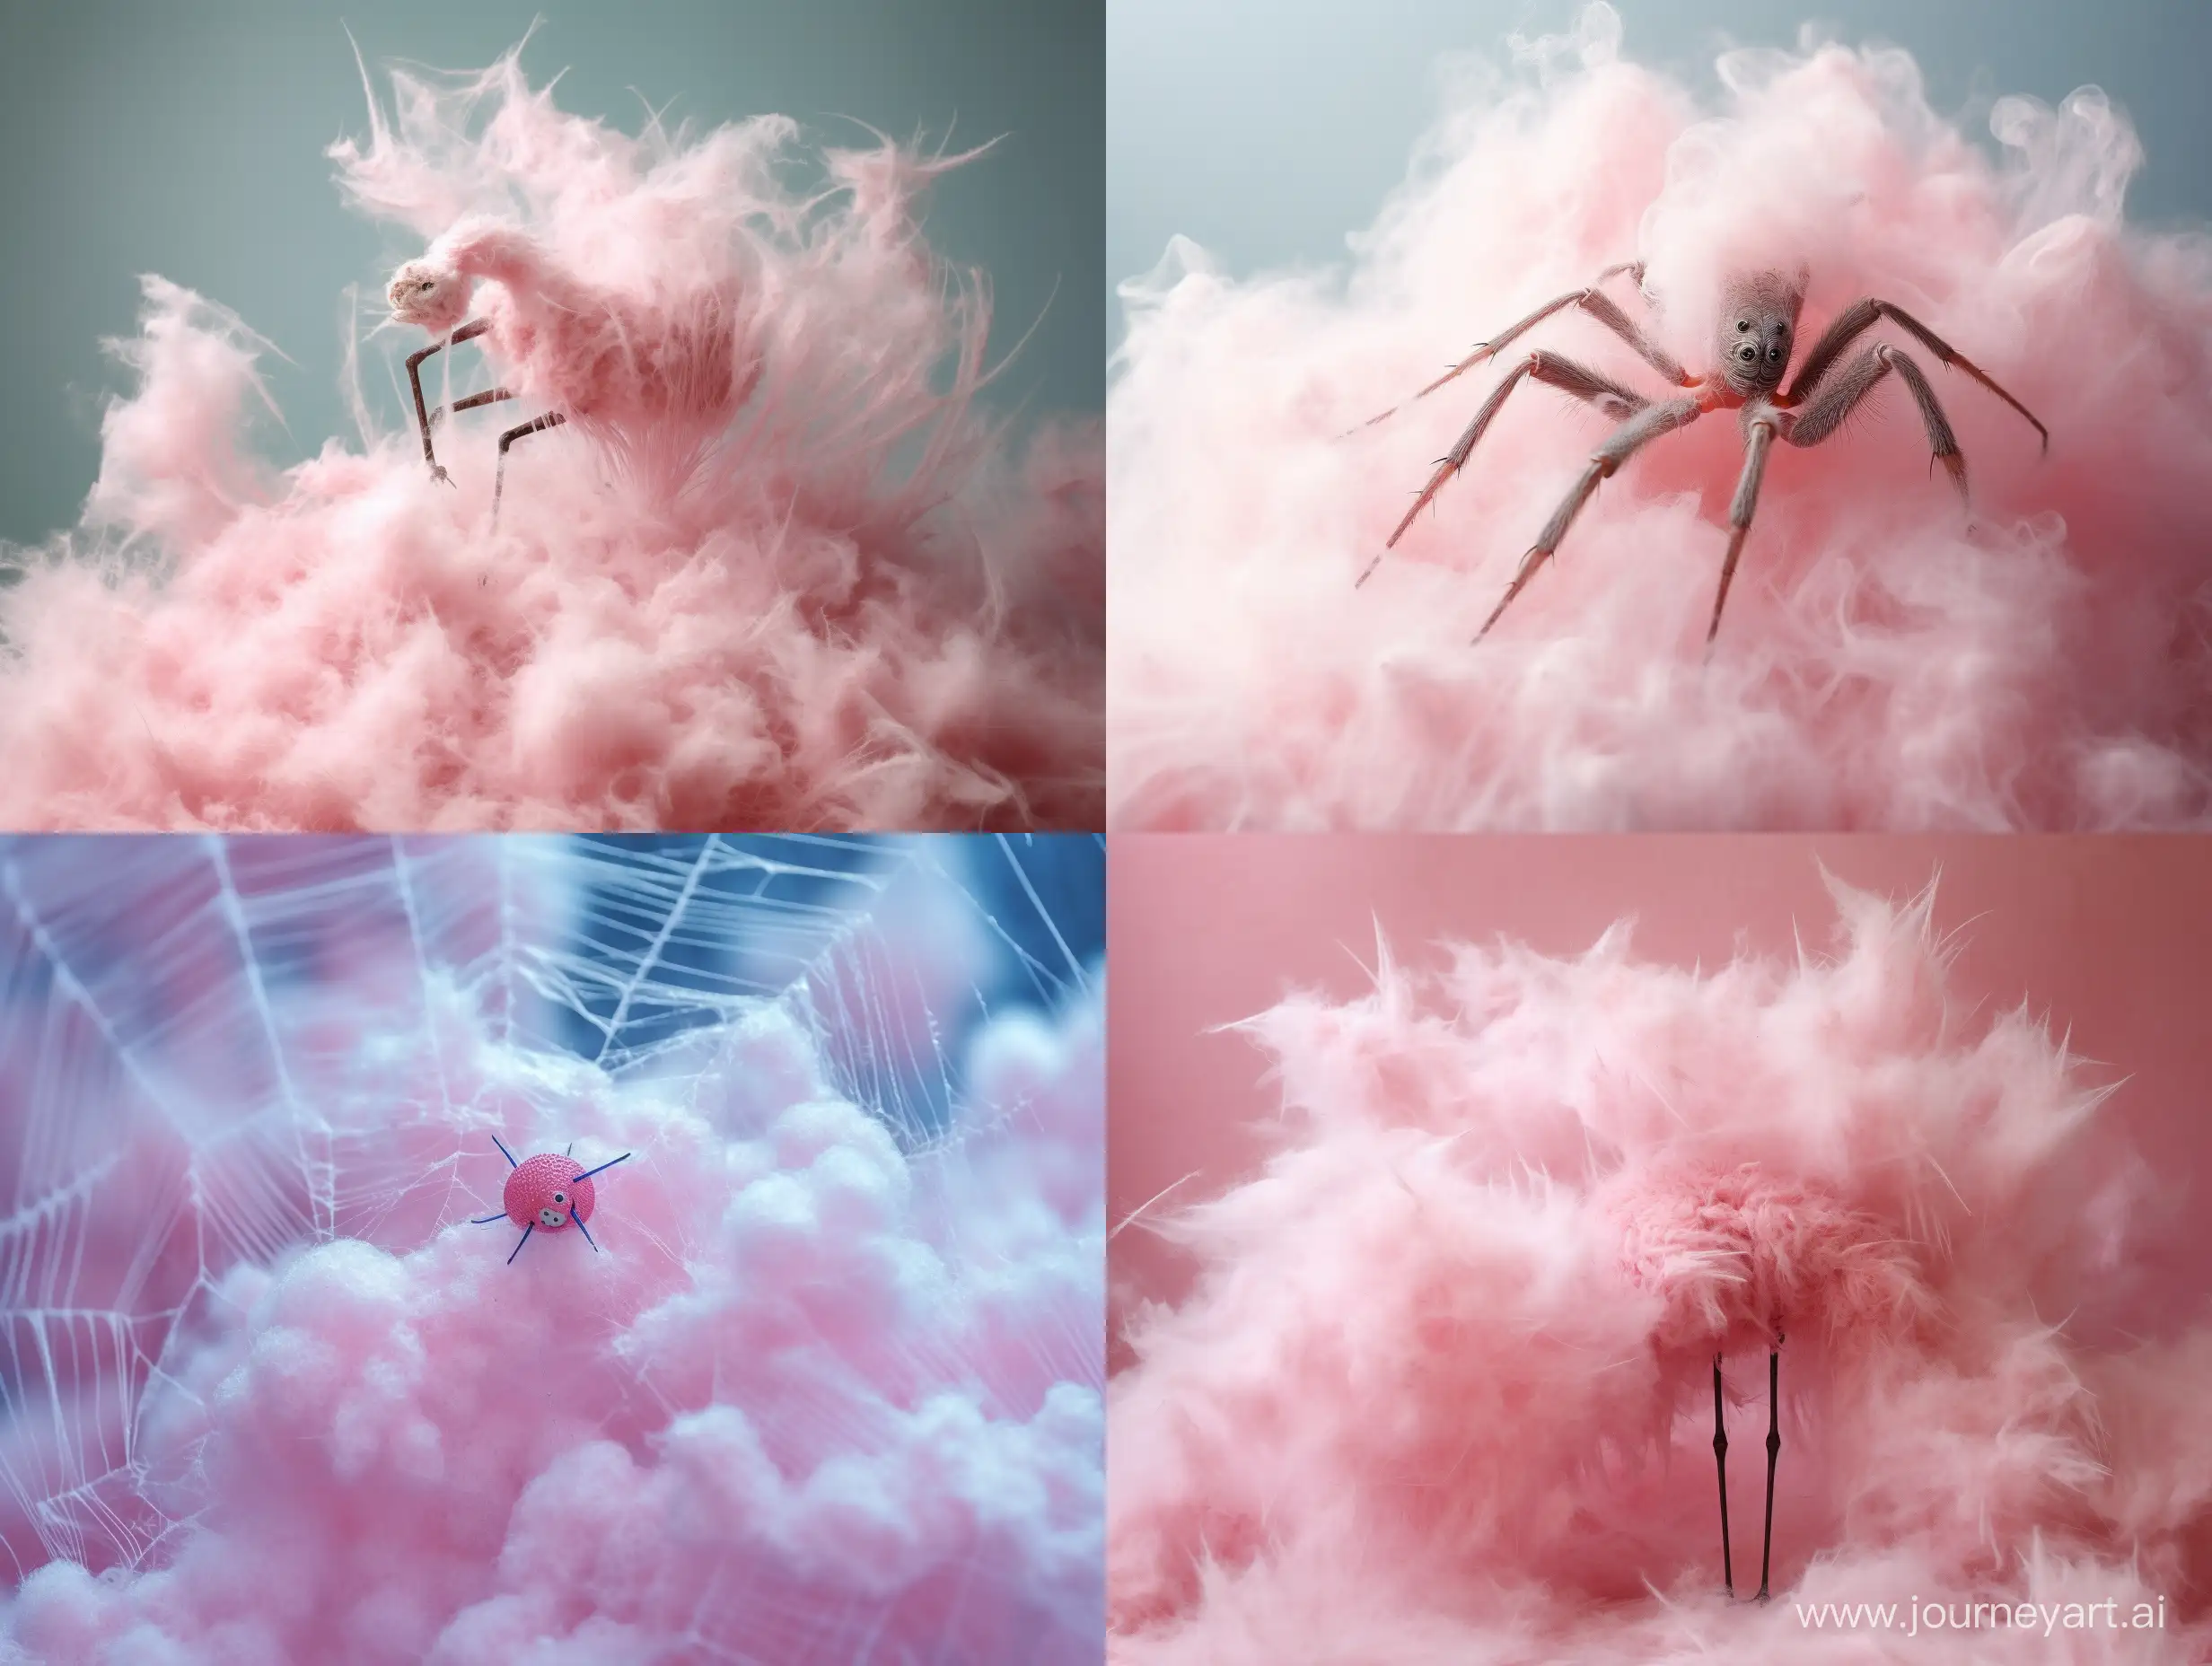 cotton candy made out of spider webs 